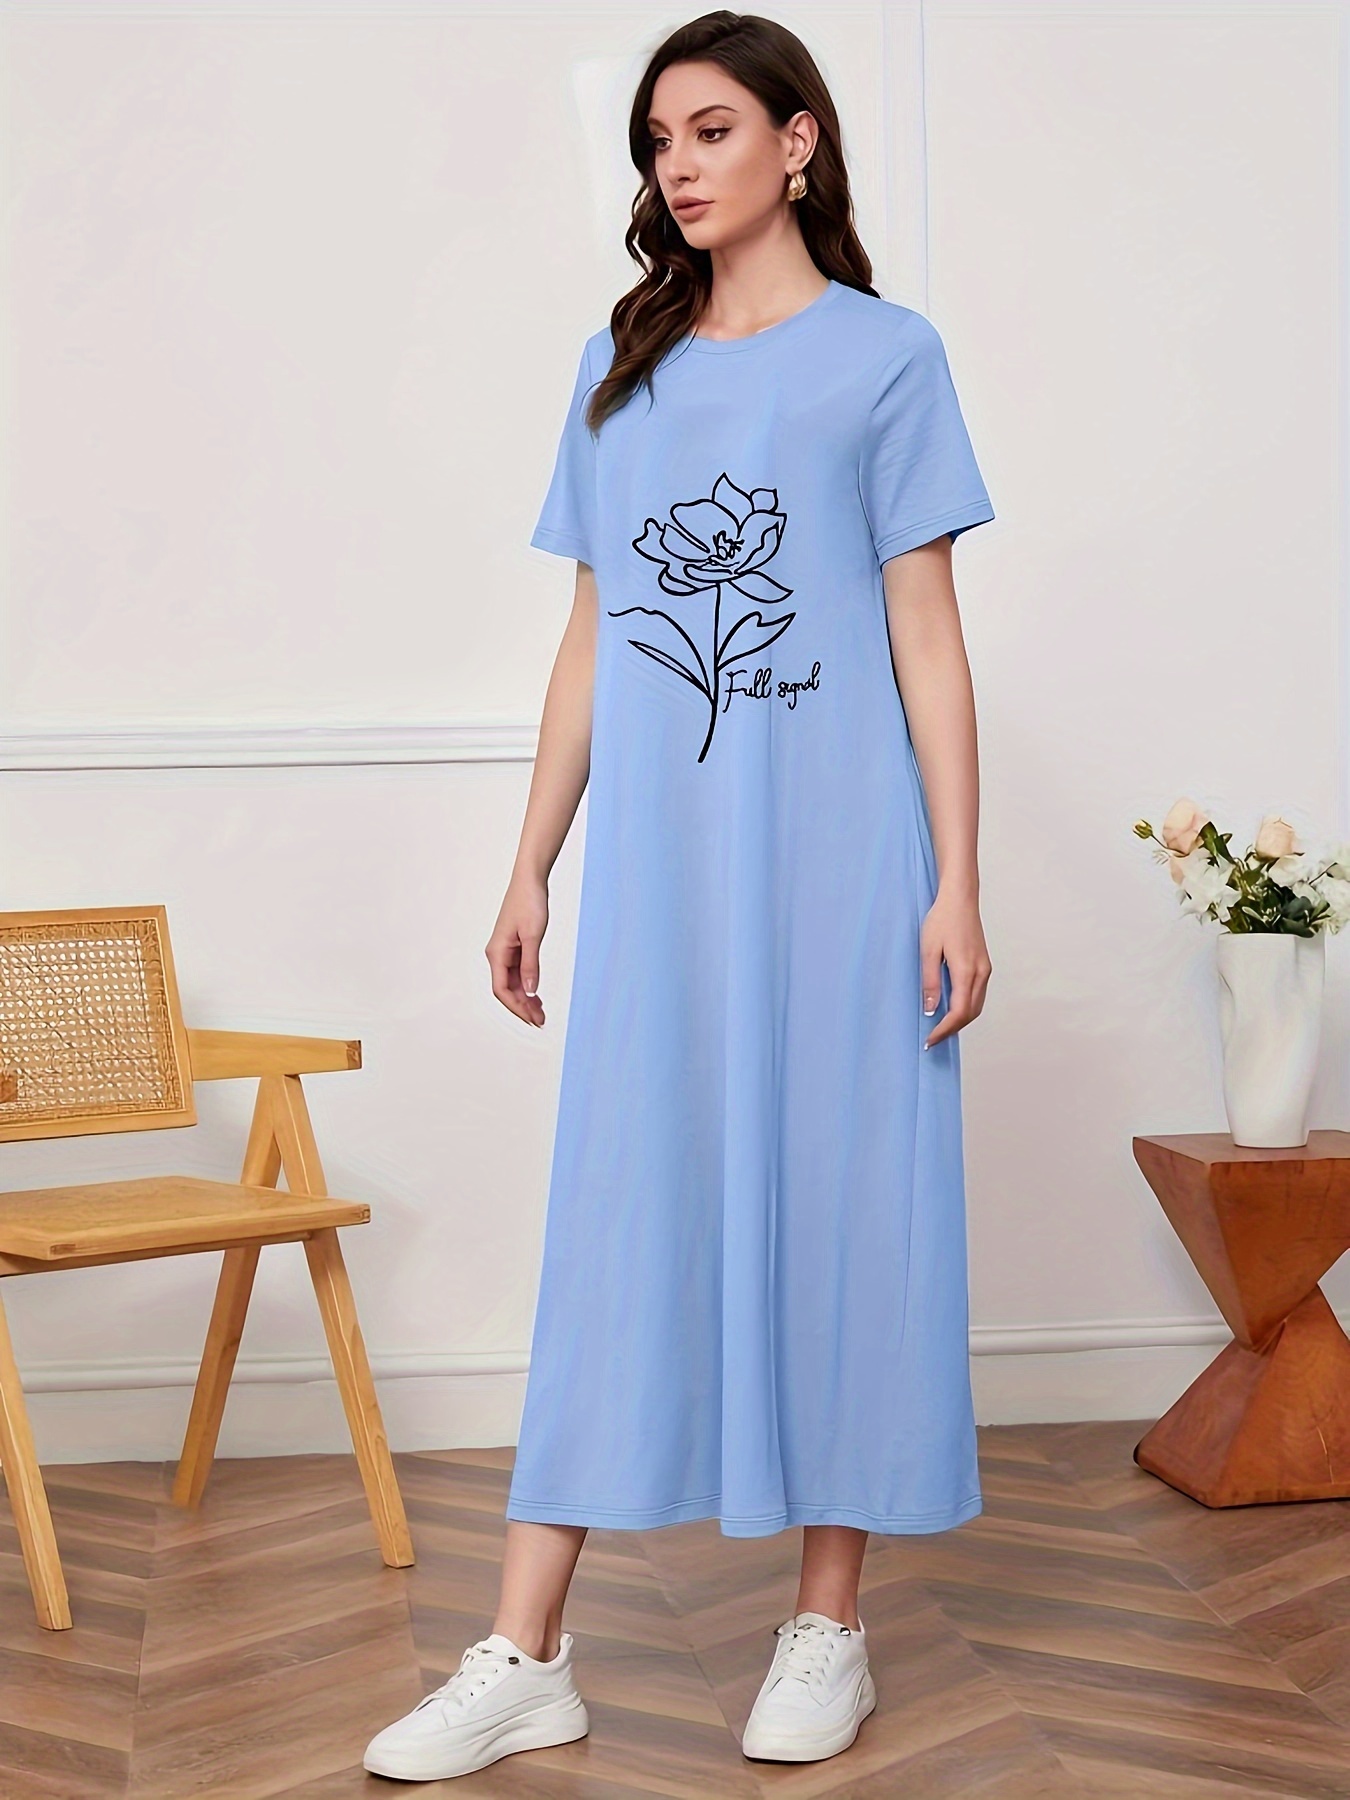 rose print crew neck dress casual short sleeve dress for spring summer womens clothing